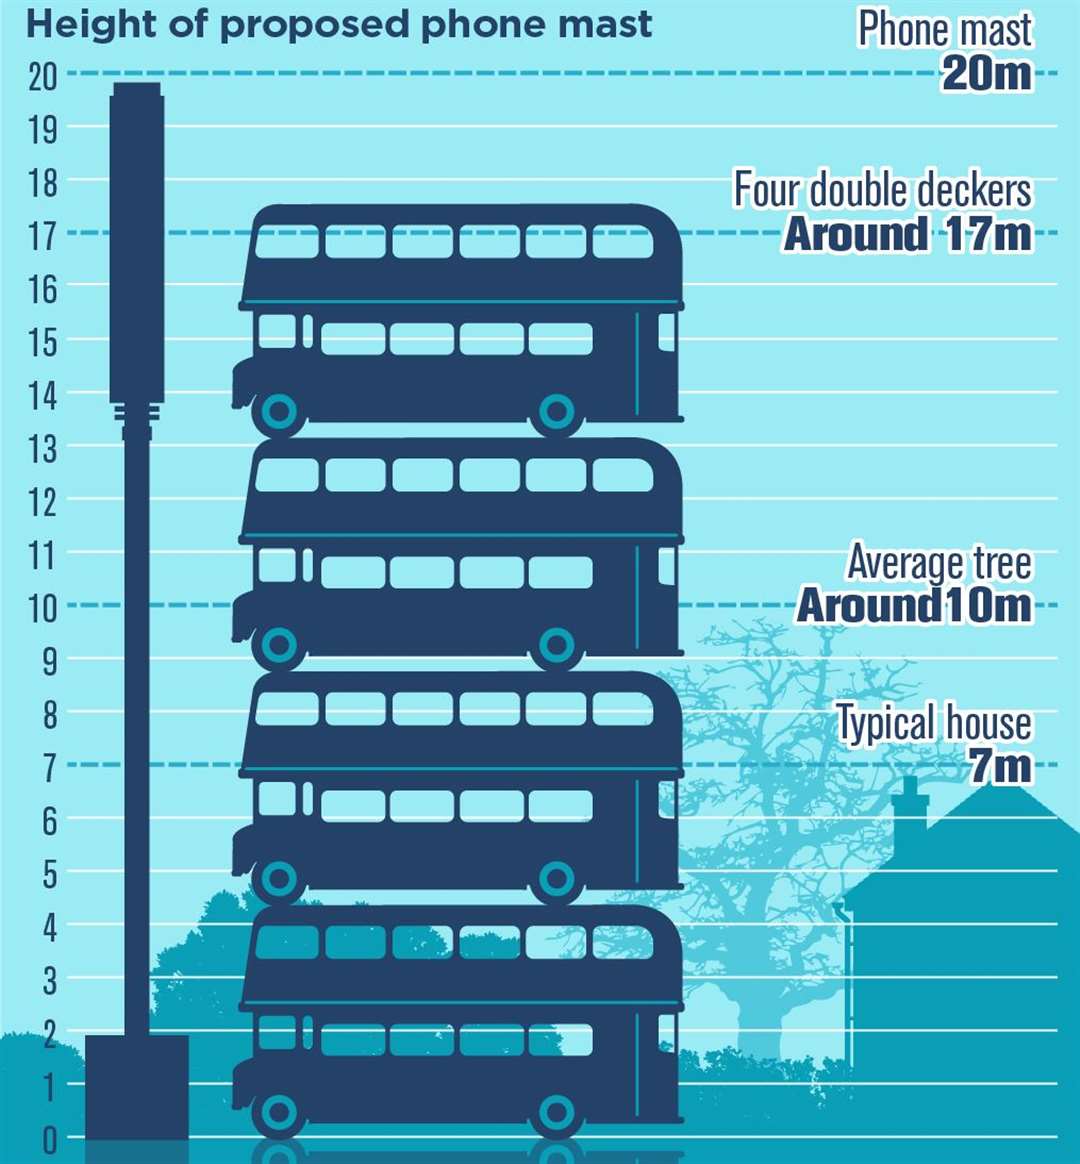 The 5G mast would be taller than four stacked double-decker buses